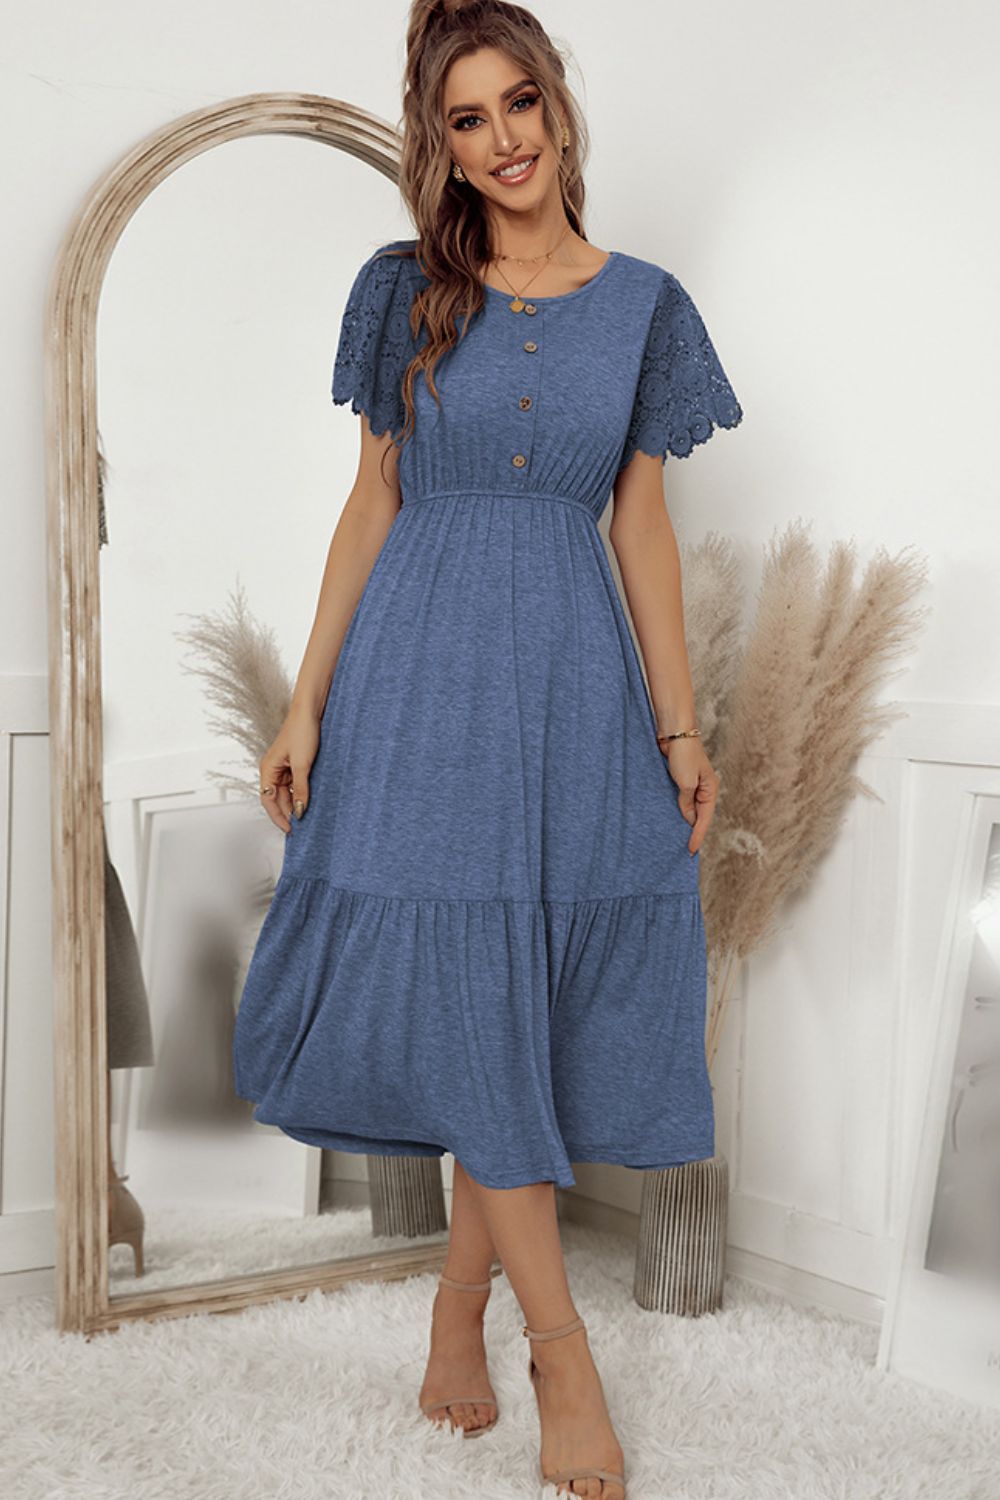 Decorative Button Round Neck Lace Sleeve Dress - By Baano